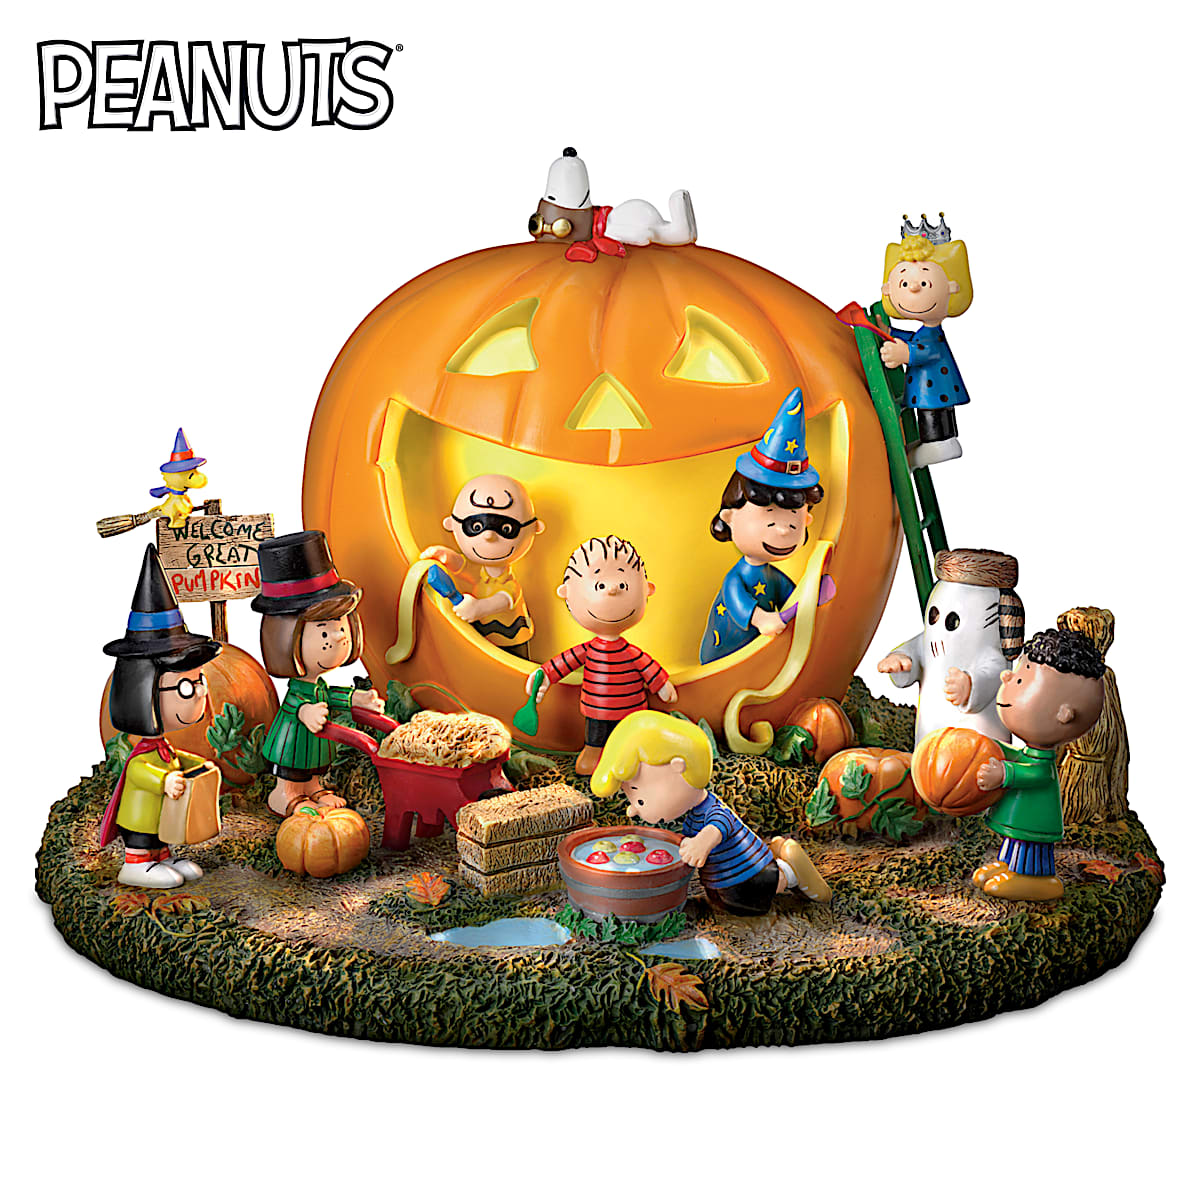 The Snoopy PEANUTS Great Pumpkin Carving Party Halloween Sculpture